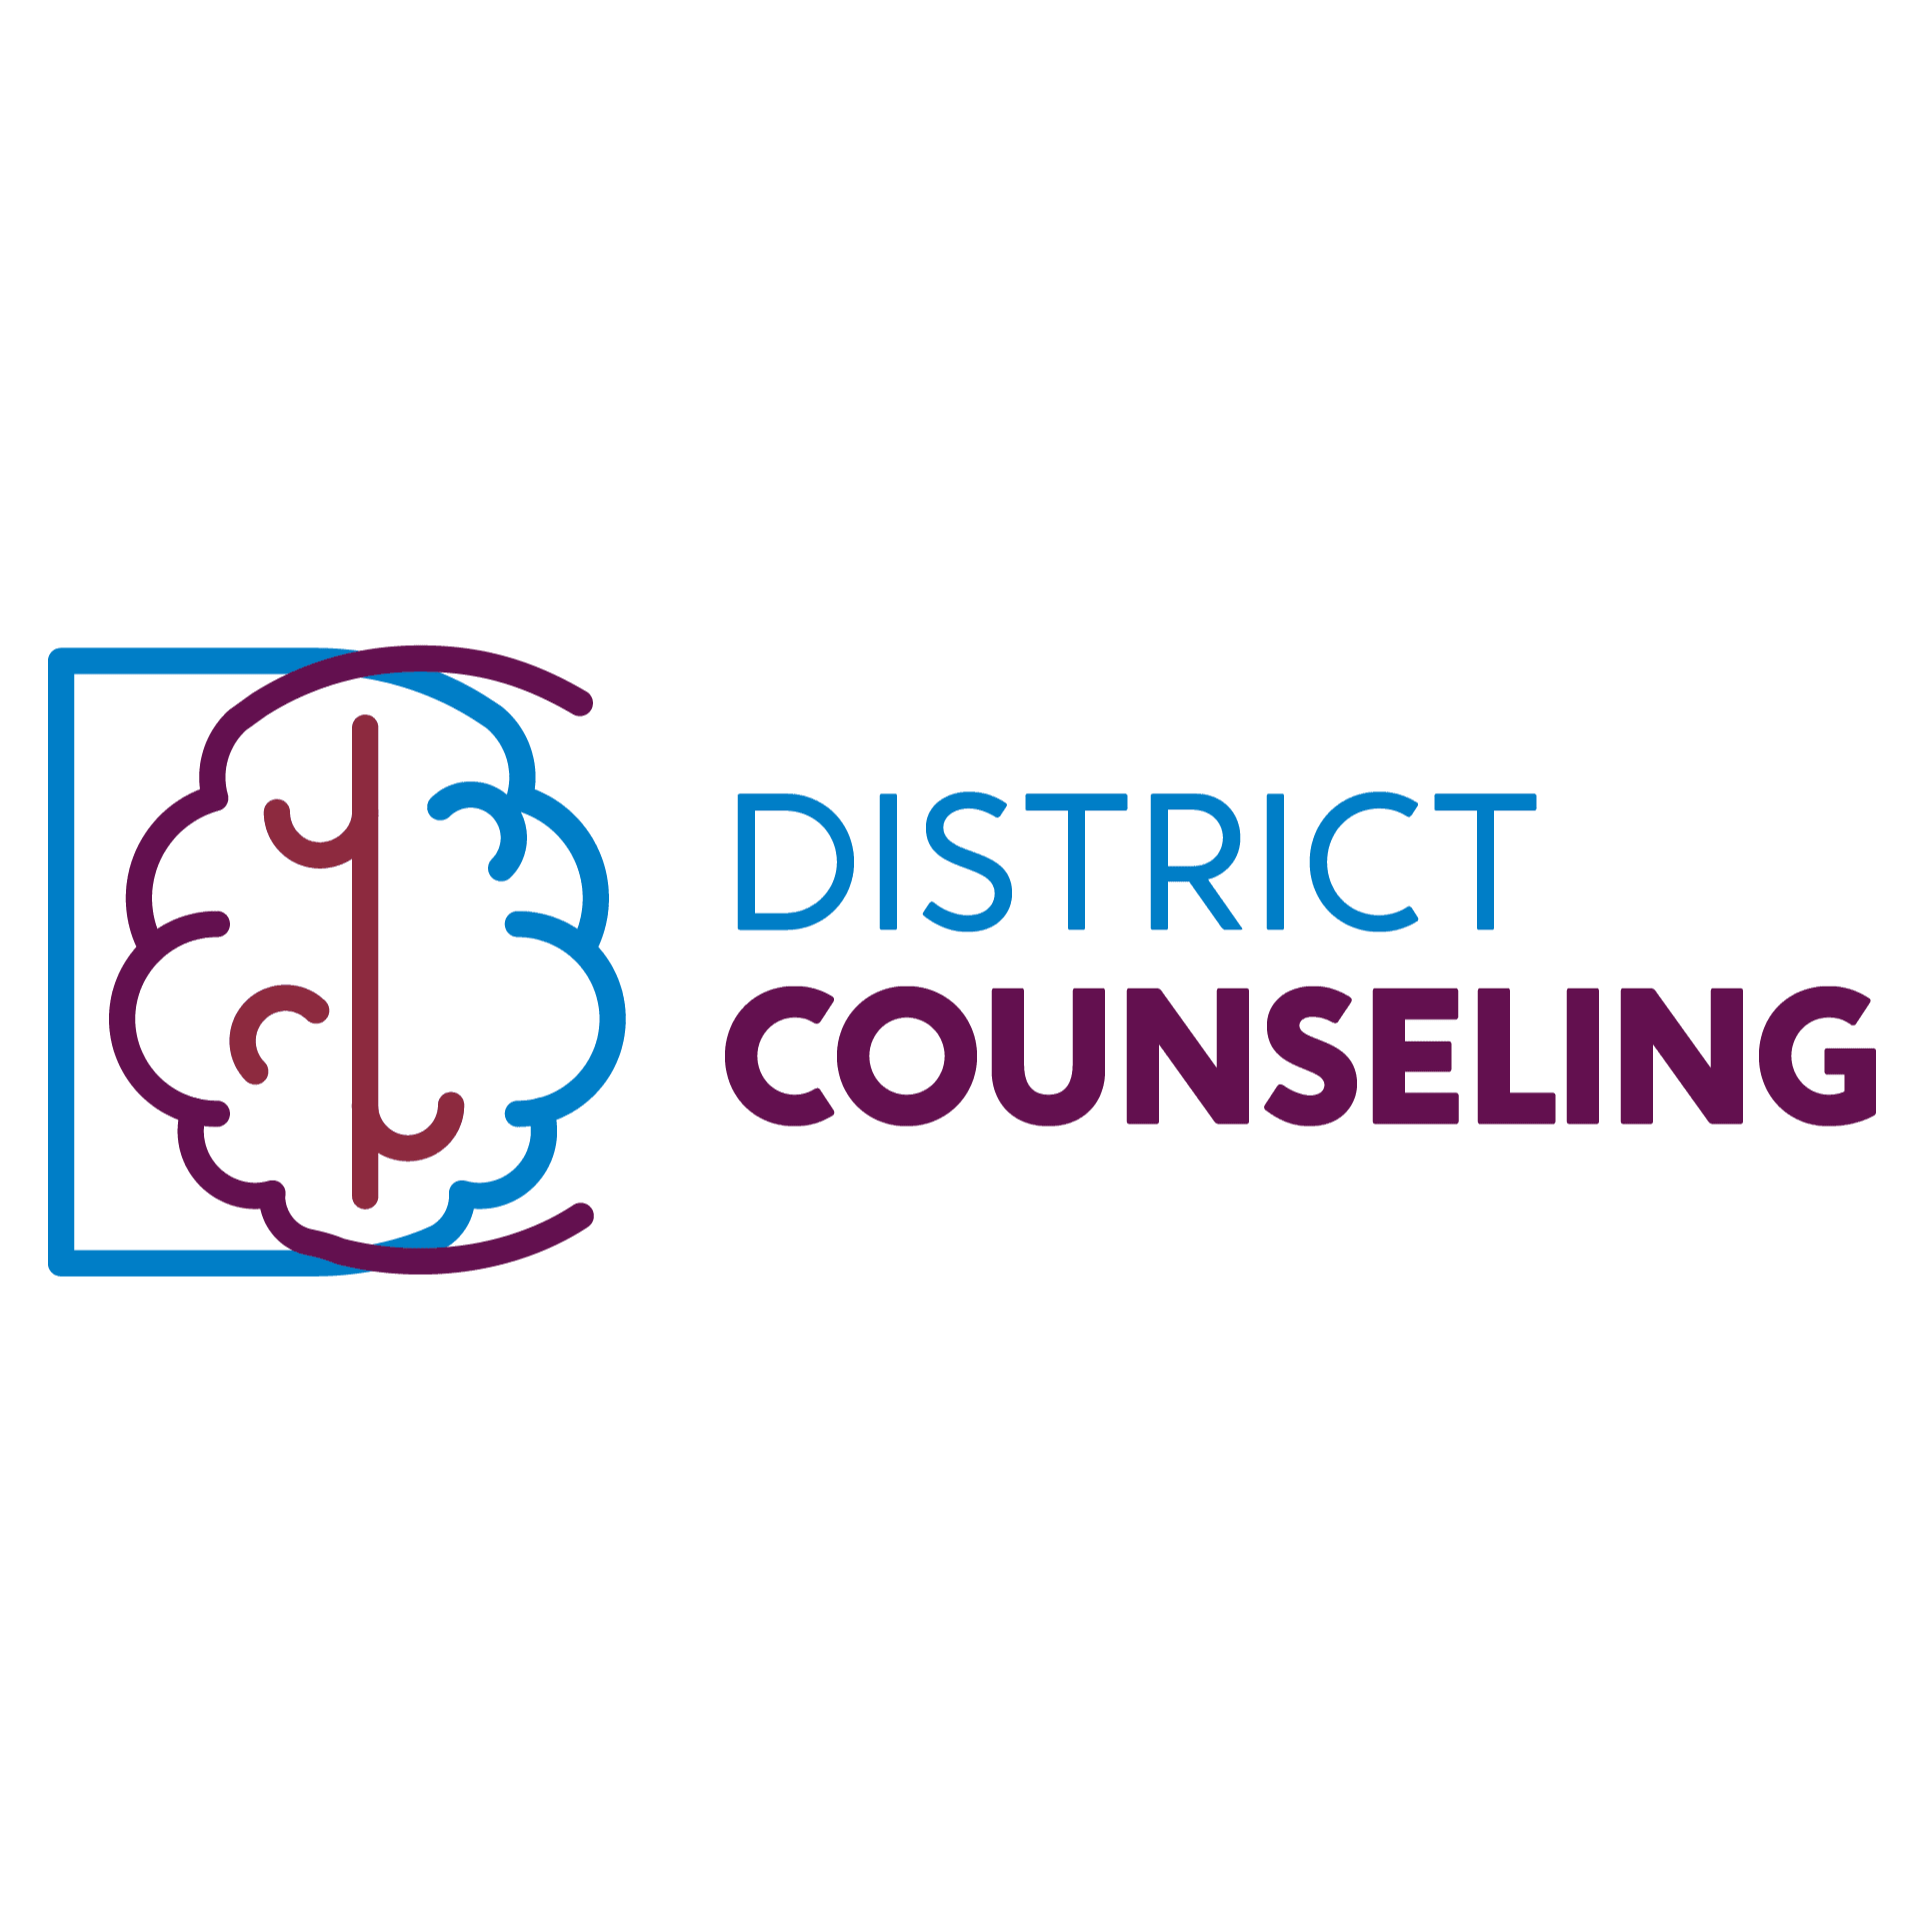 District Counseling in Pearland - Pearland, TX 77584 - (346)440-1800 | ShowMeLocal.com